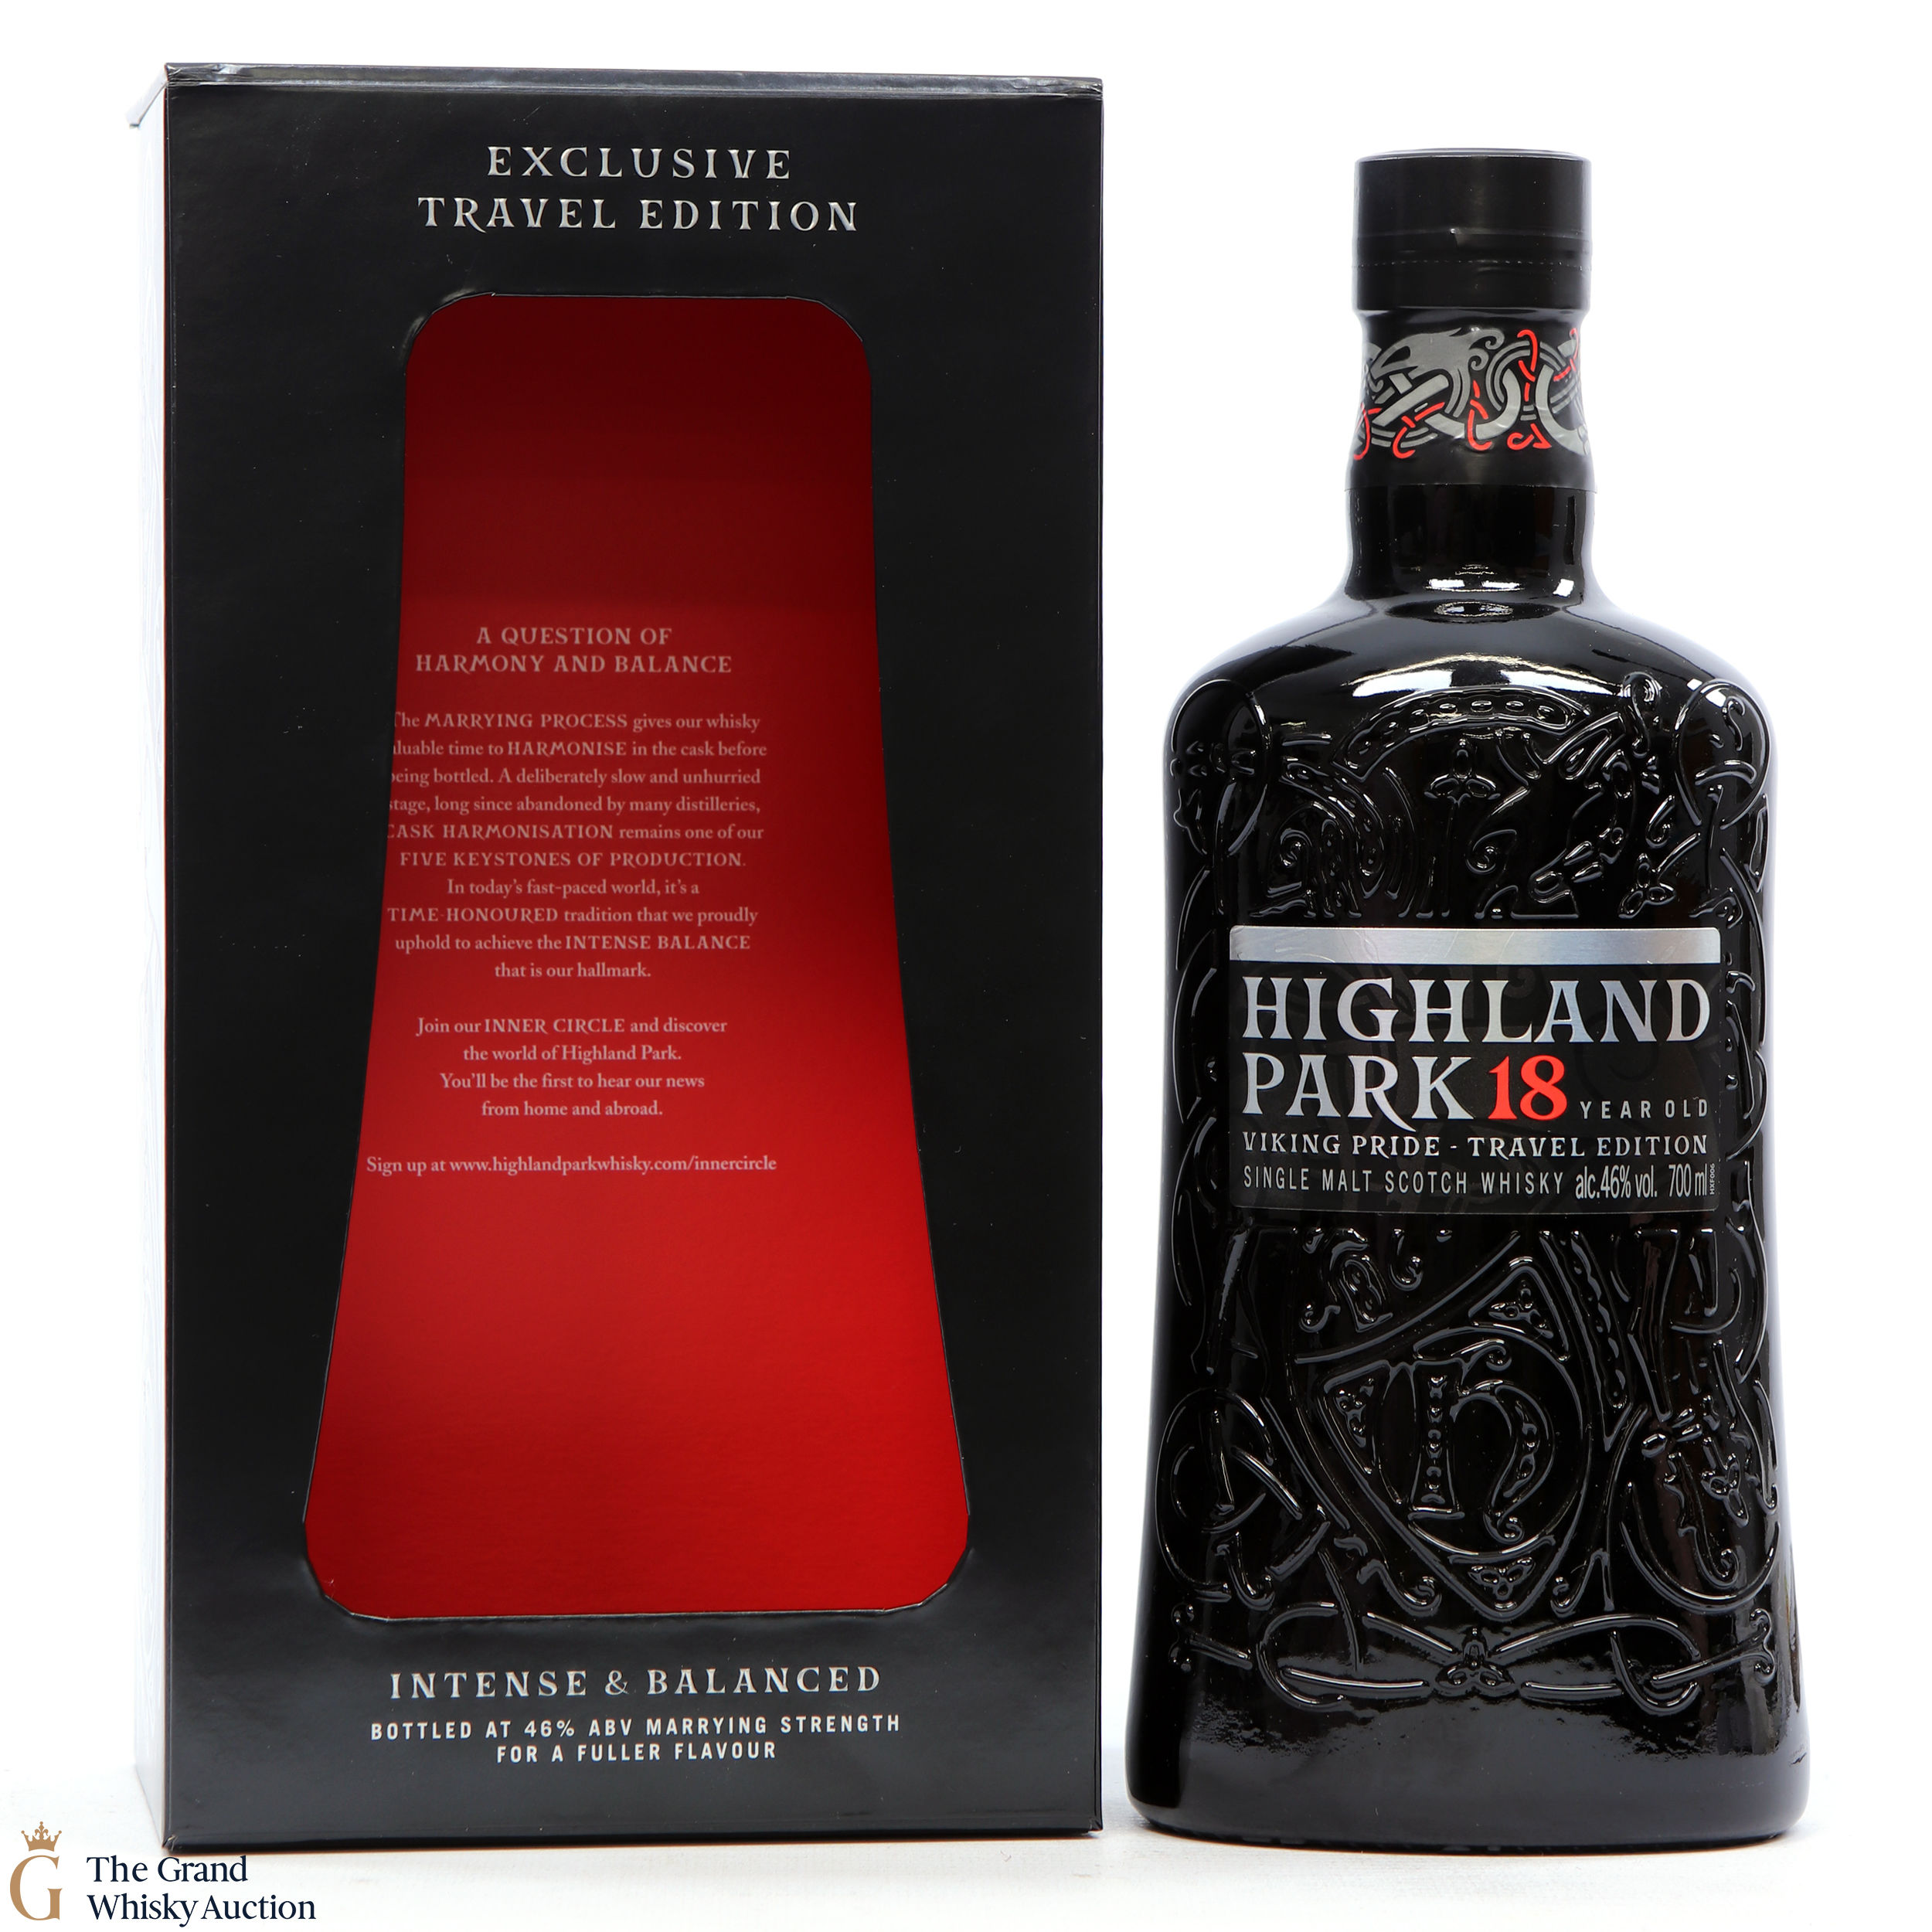 Highland Park 18 Year Old Viking Pride Travel Edition Auction The Grand Whisky Auction